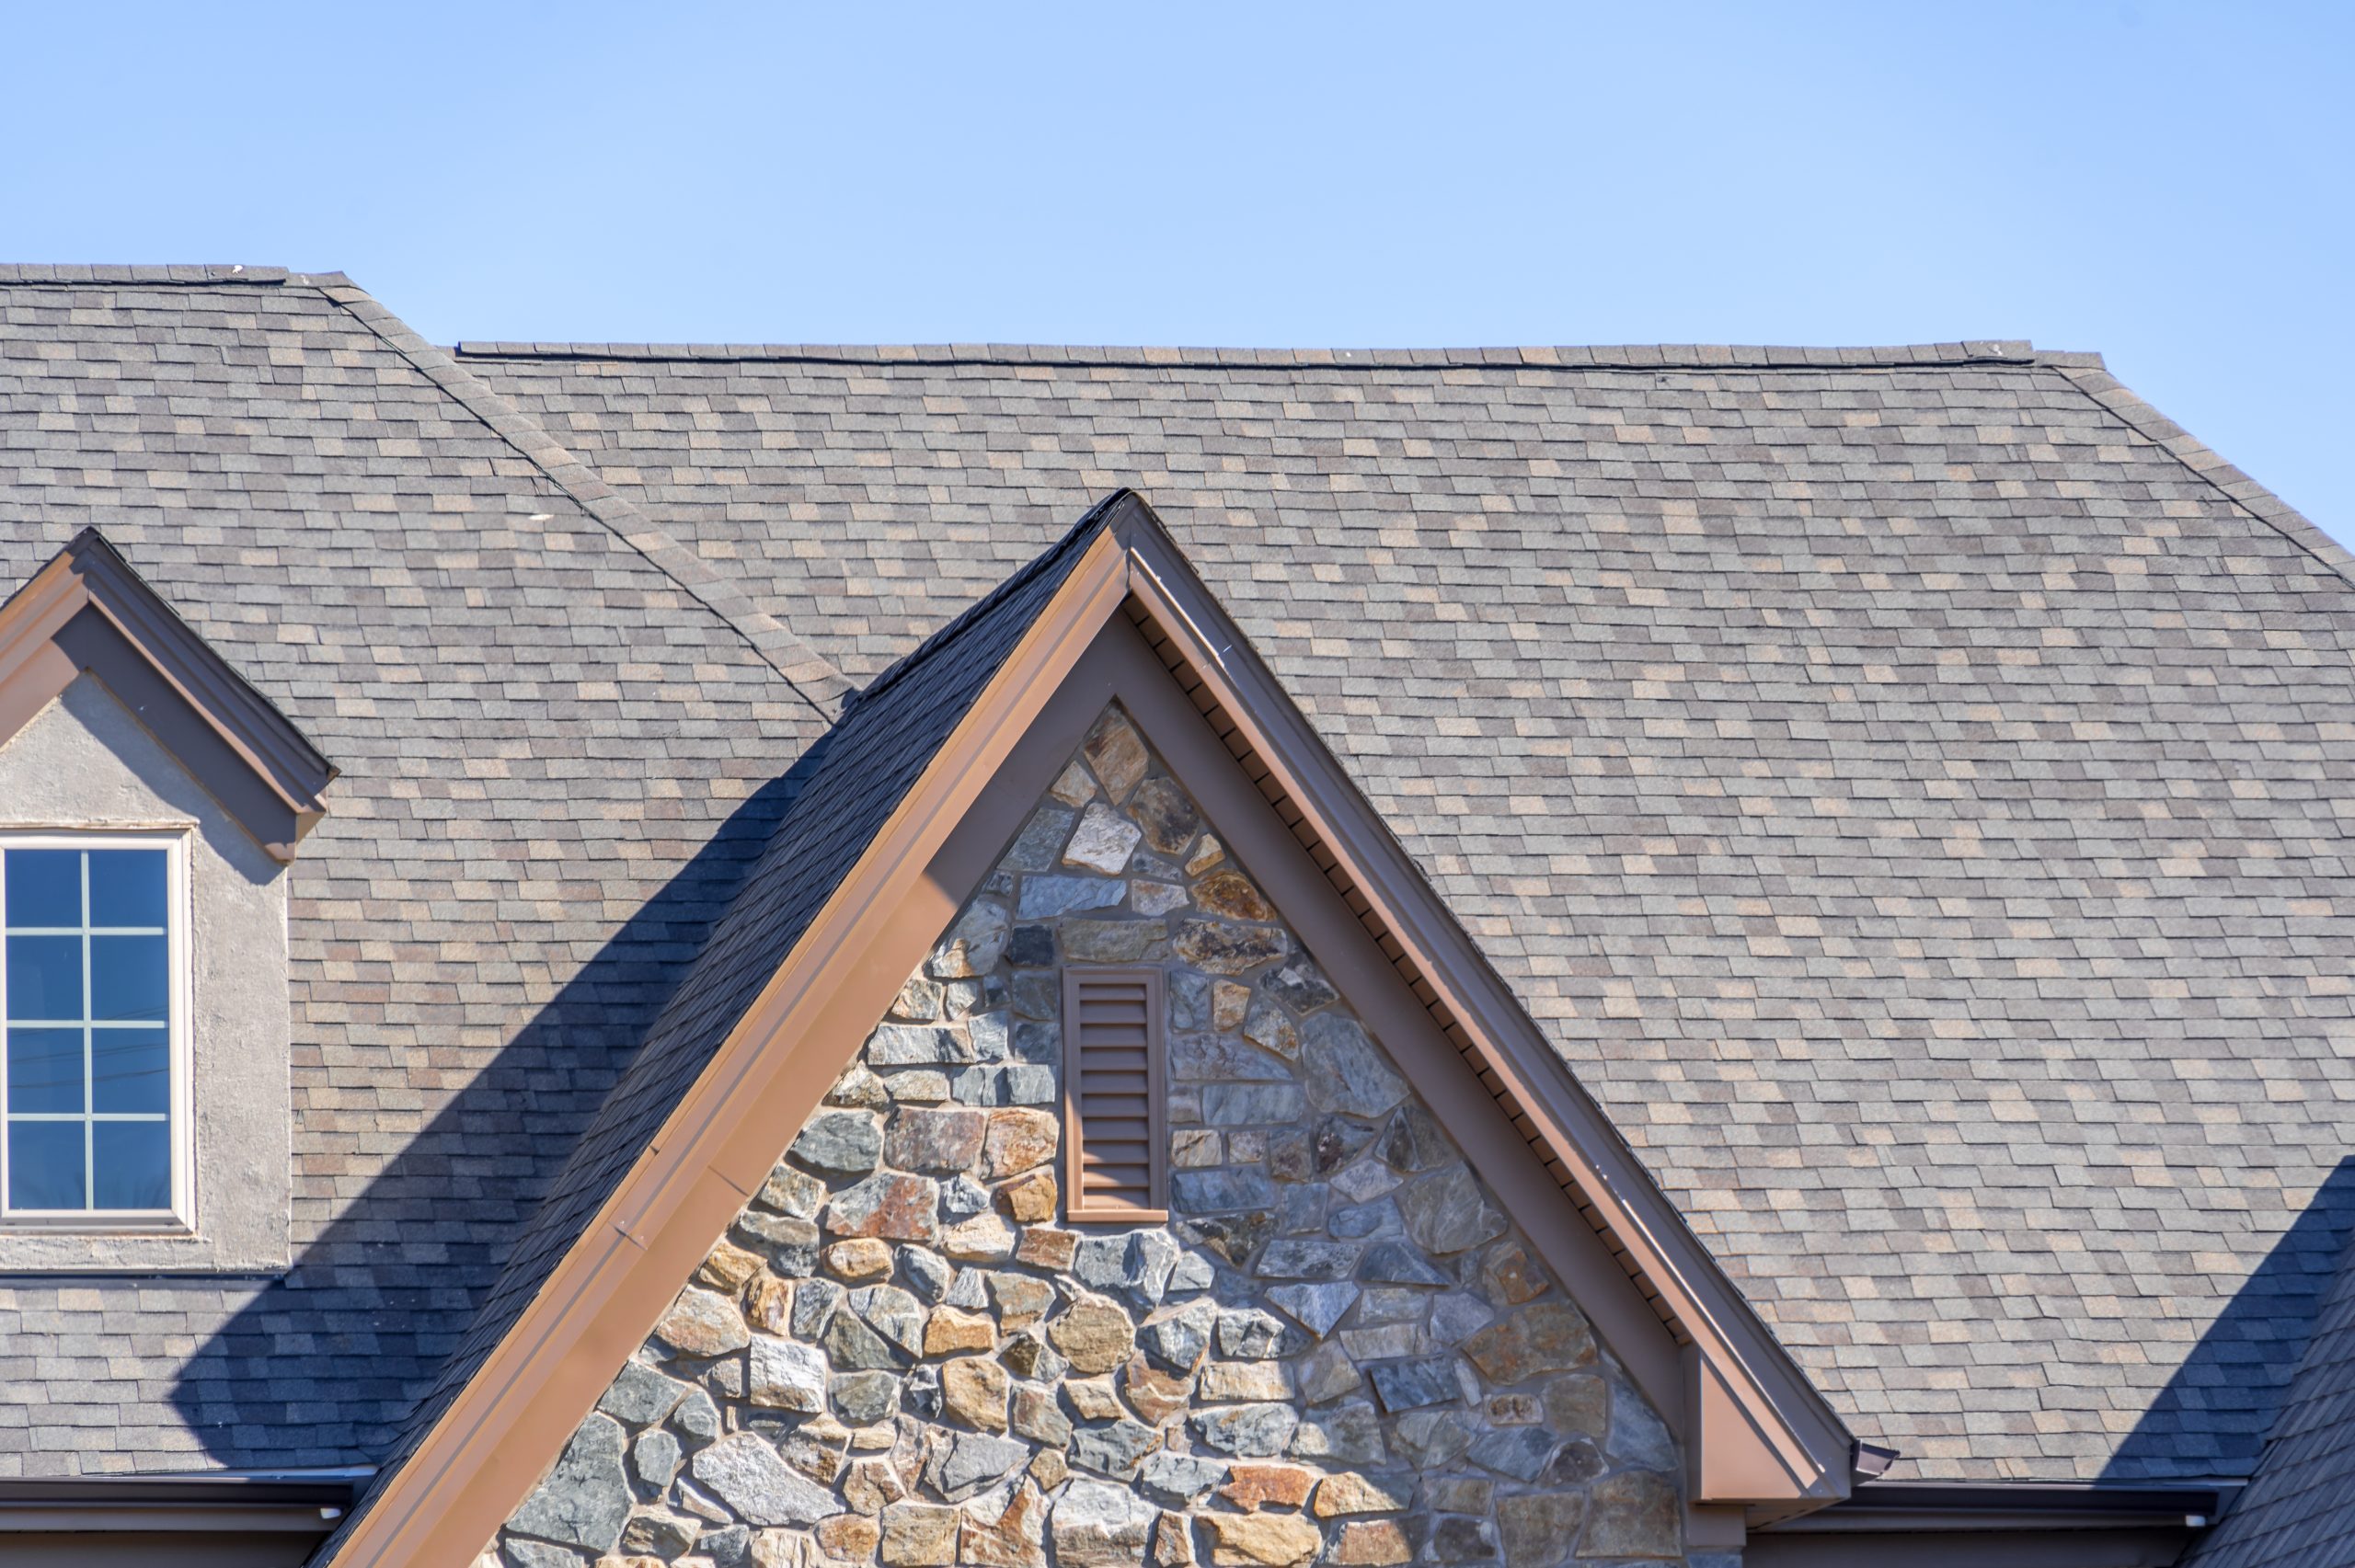 Alps-style gable asphalt roof with stone siding and attic window